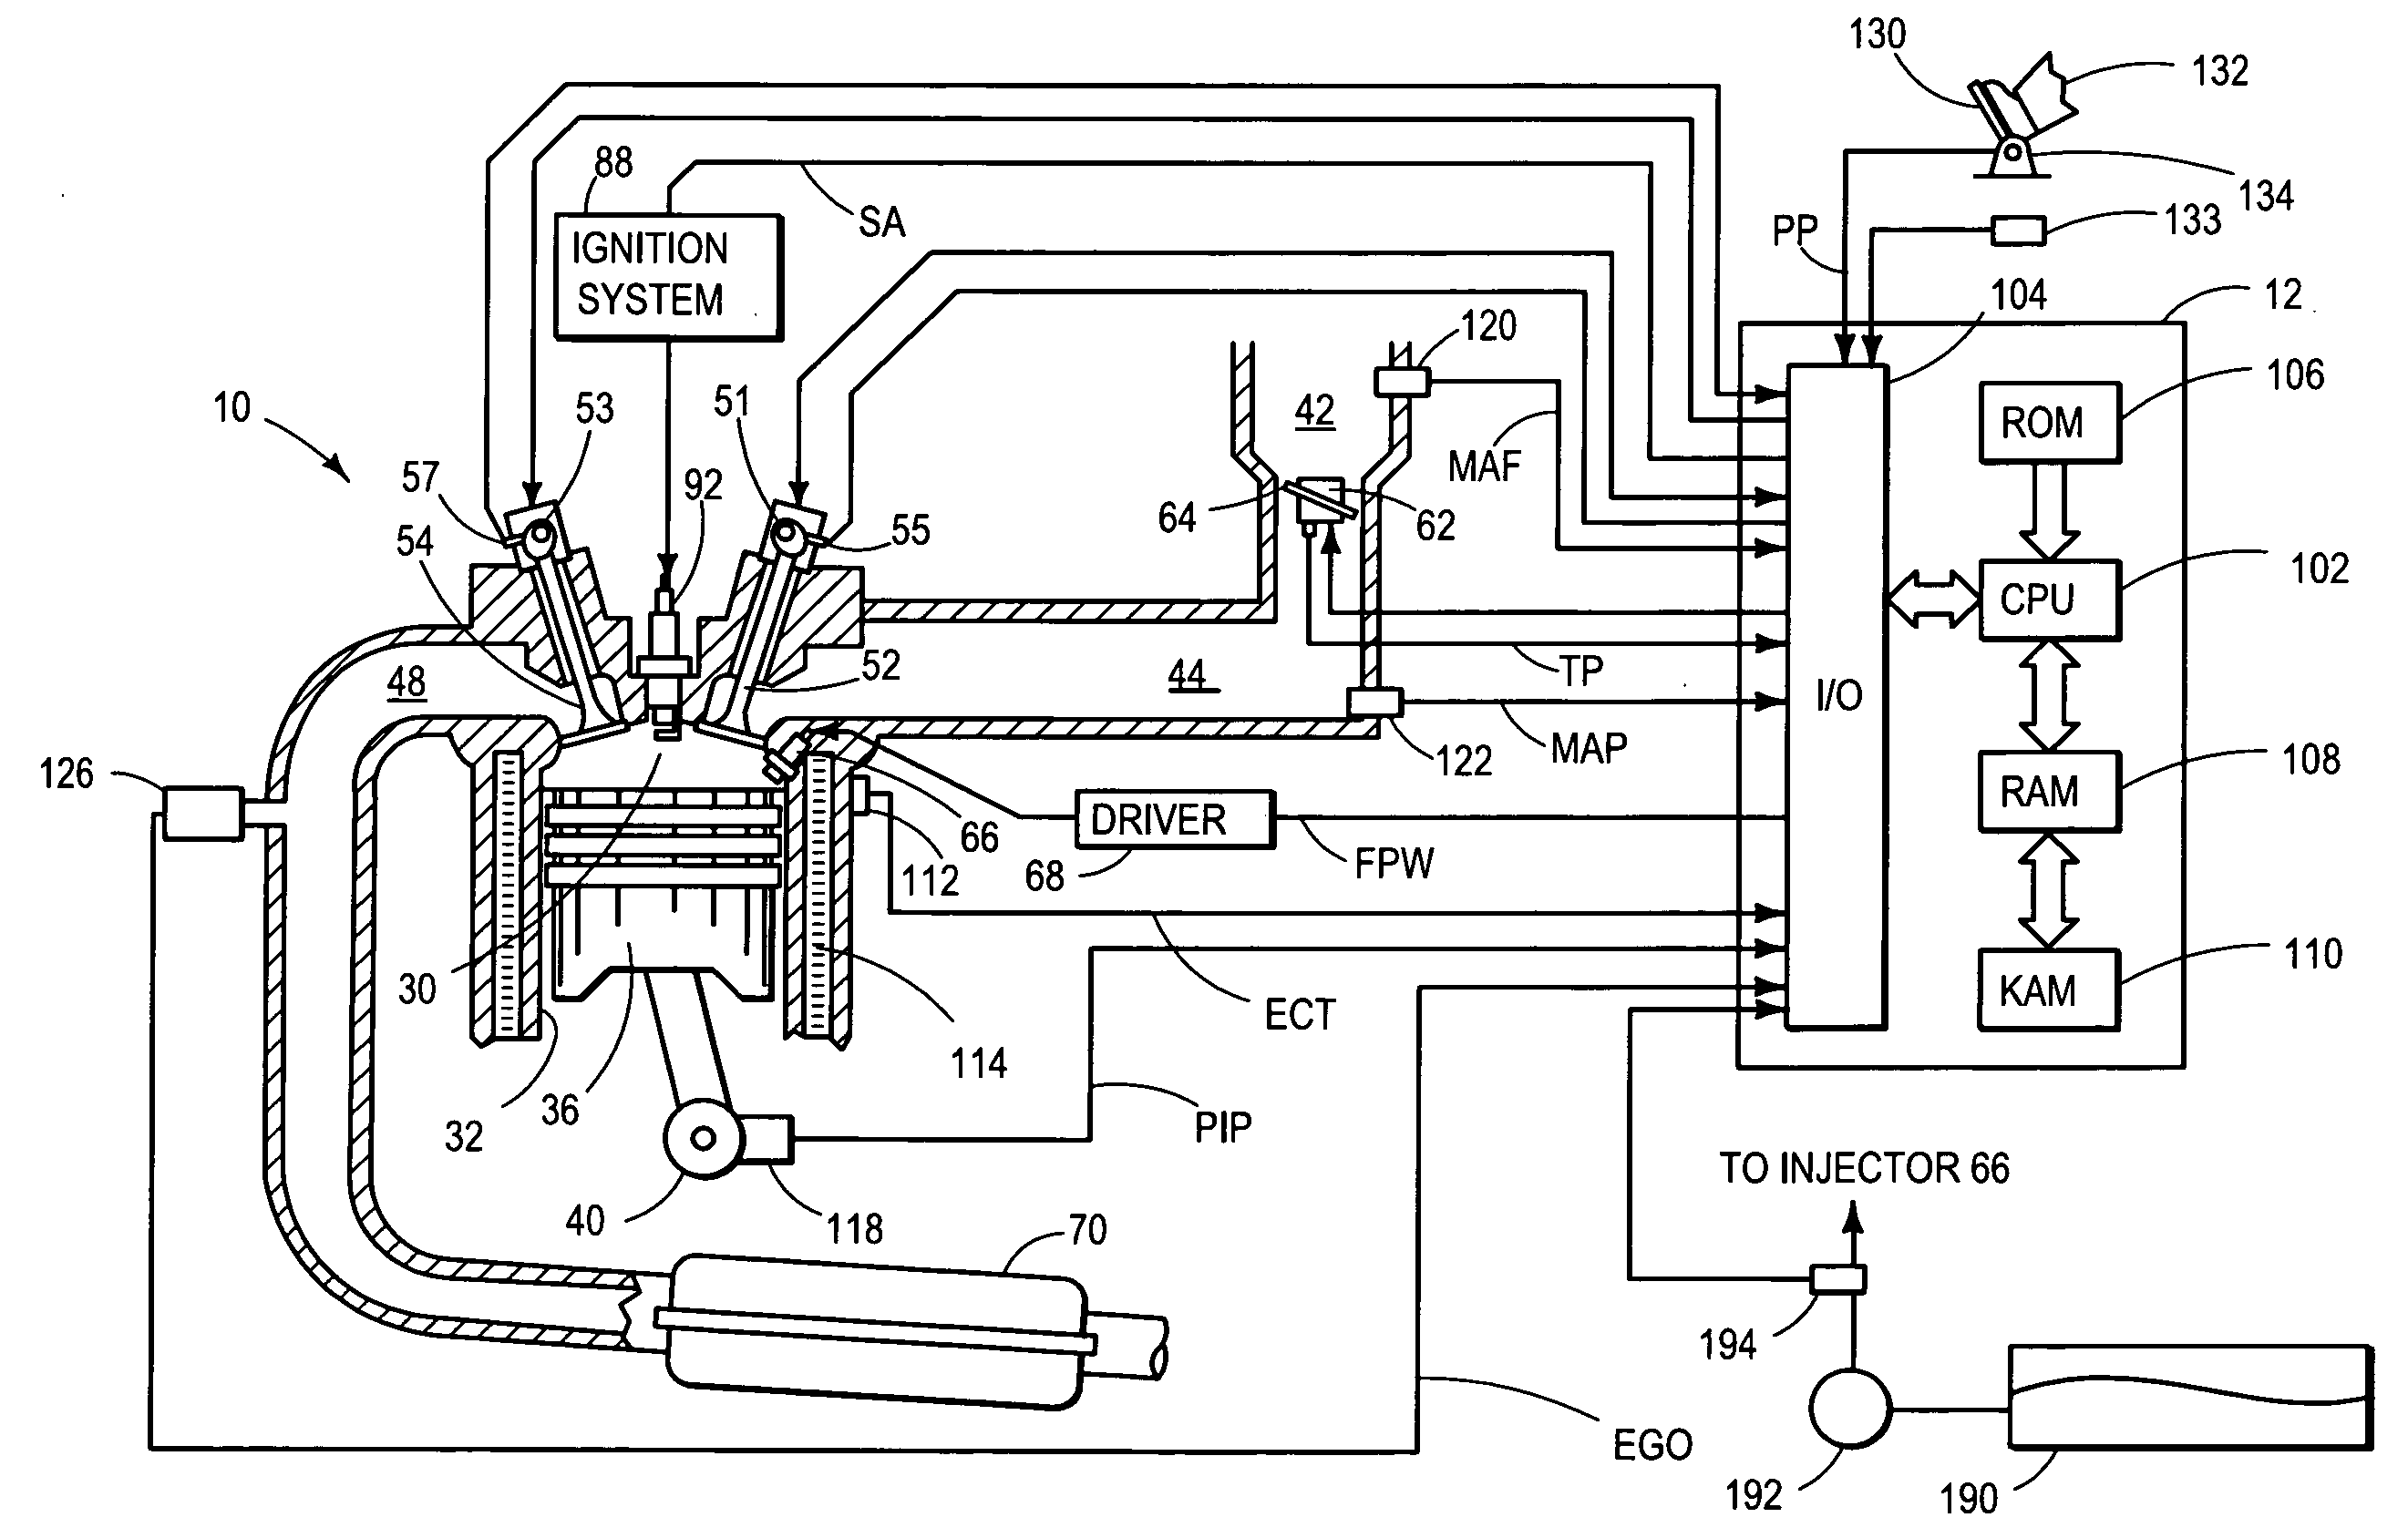 Approach for Improved Fuel Vaporization in a Directly Injected Internal Combustion Engine